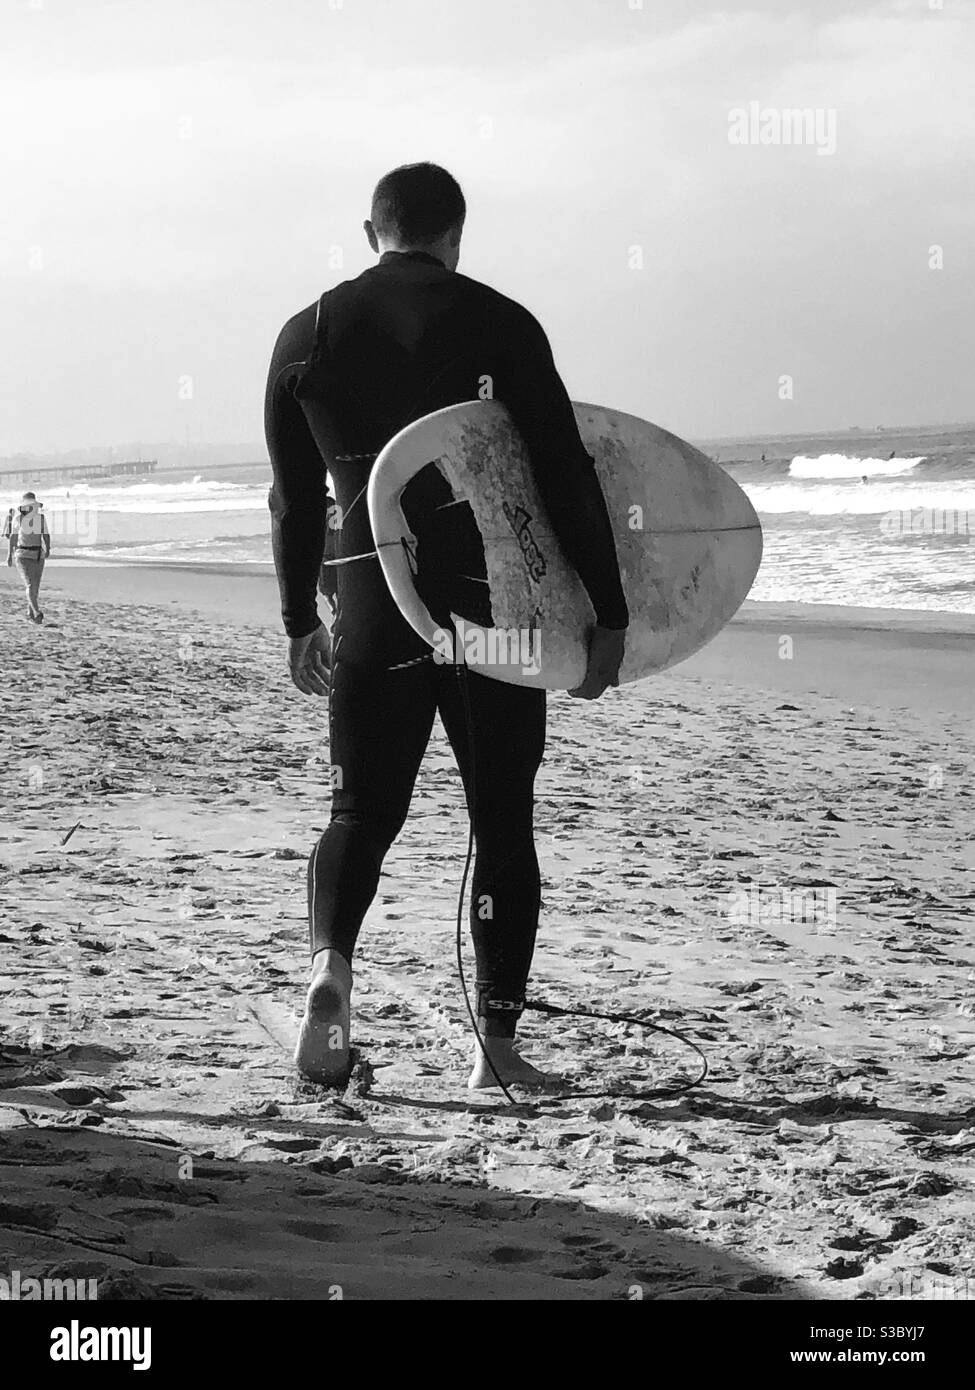 Black and white photo of a surfer caring a surfboard on the beach in Santa Monica headed toward the waves of the Pacific ocean. Stock Photo